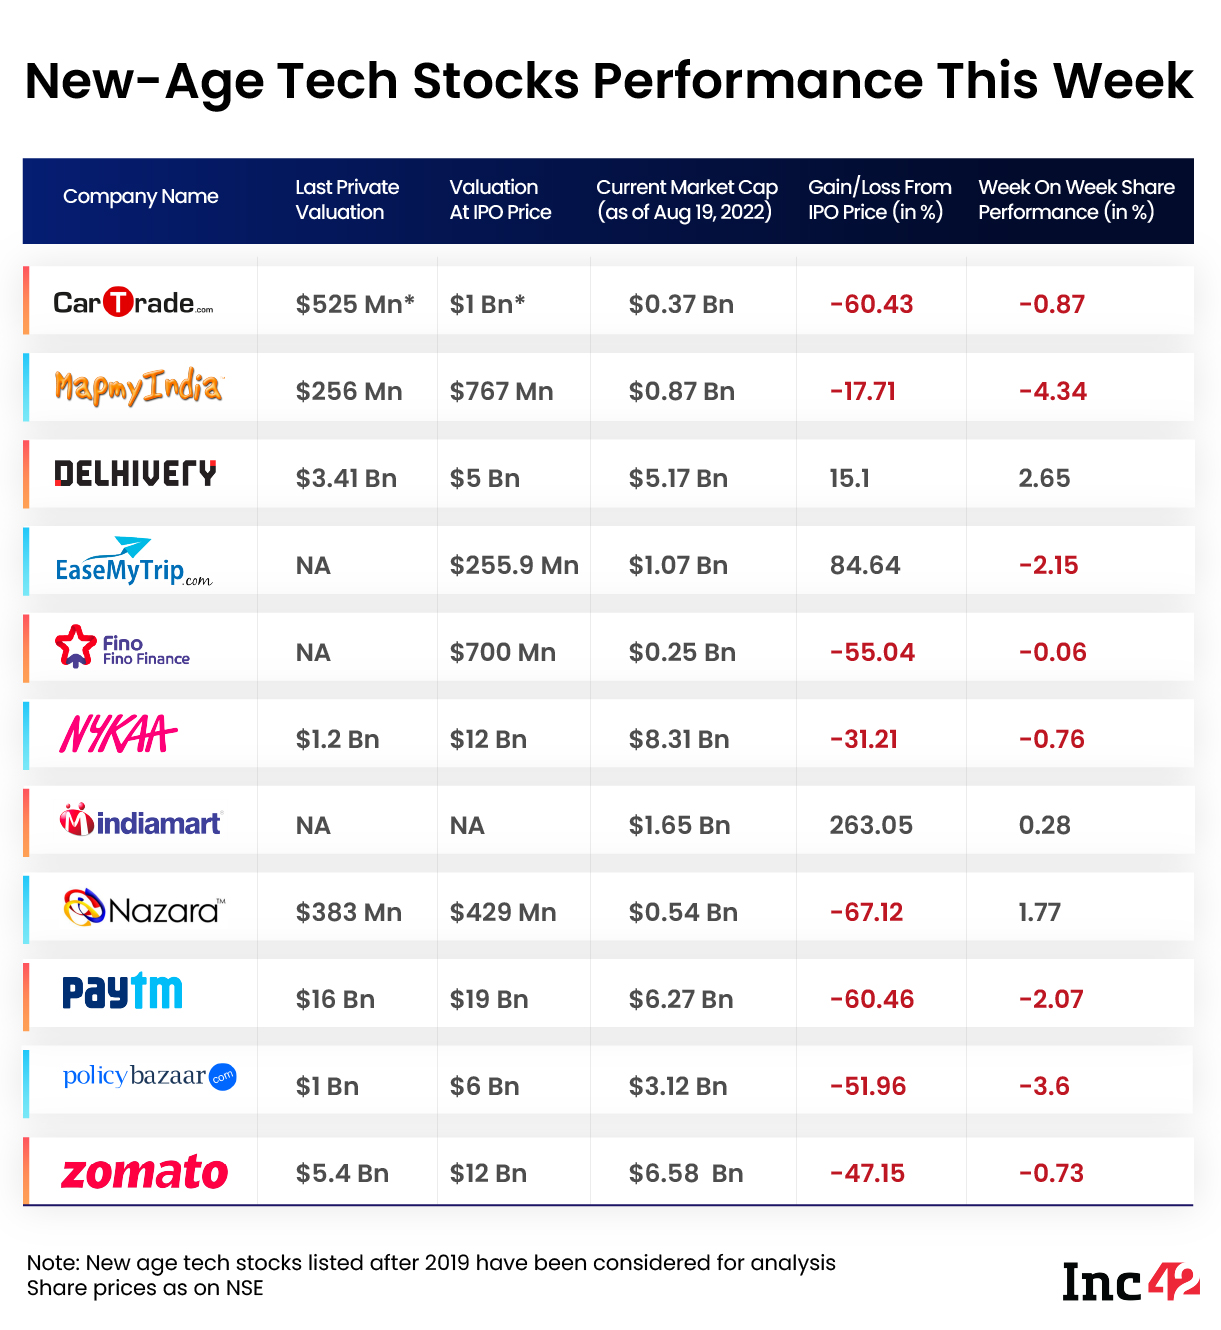 New-Age Tech Stocks Performance This Week